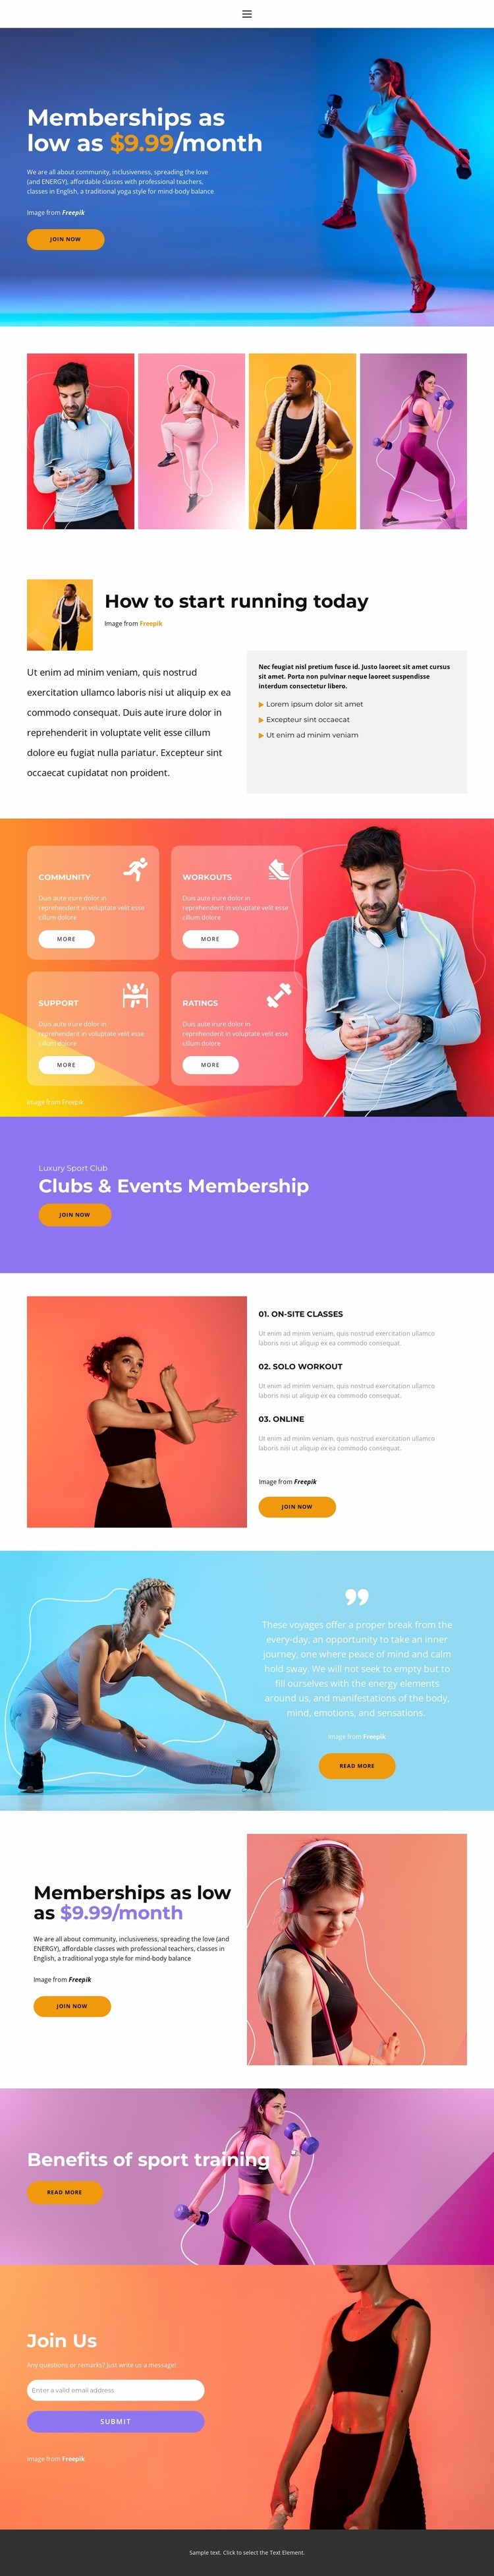 Sports every day Homepage Design